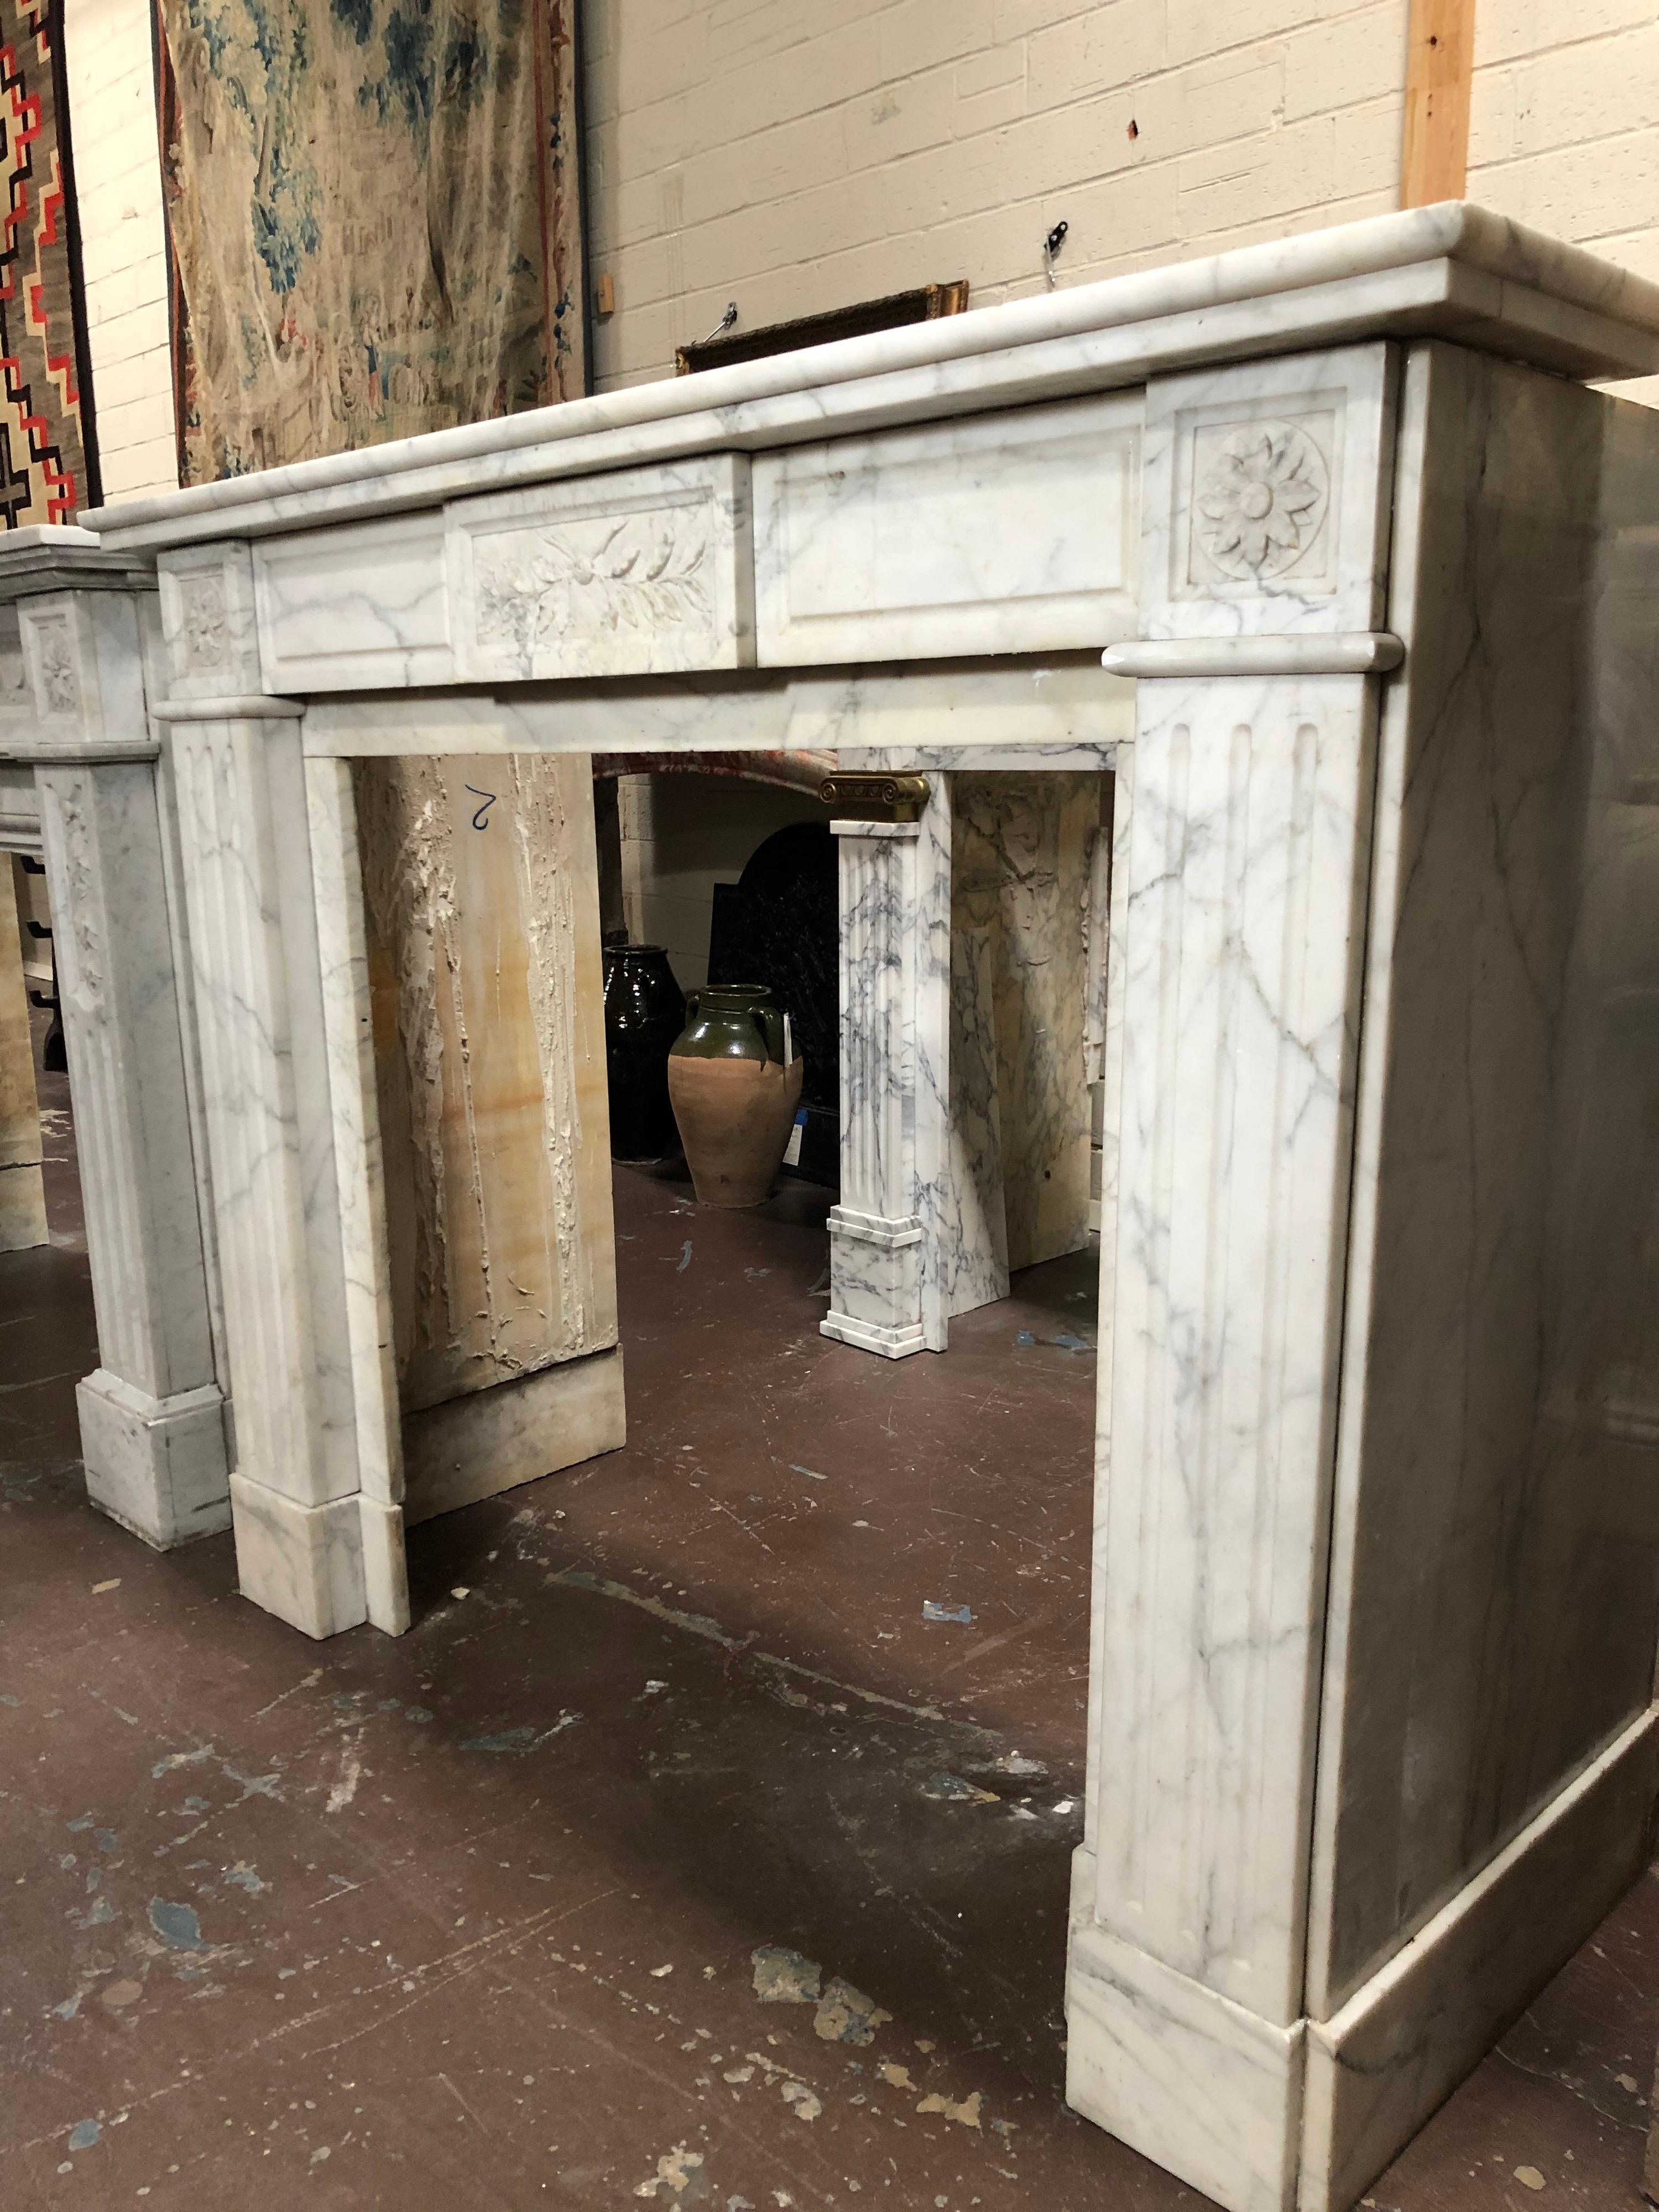 This marble fireplace origins from France, circa 1870.

Firebox: W 37